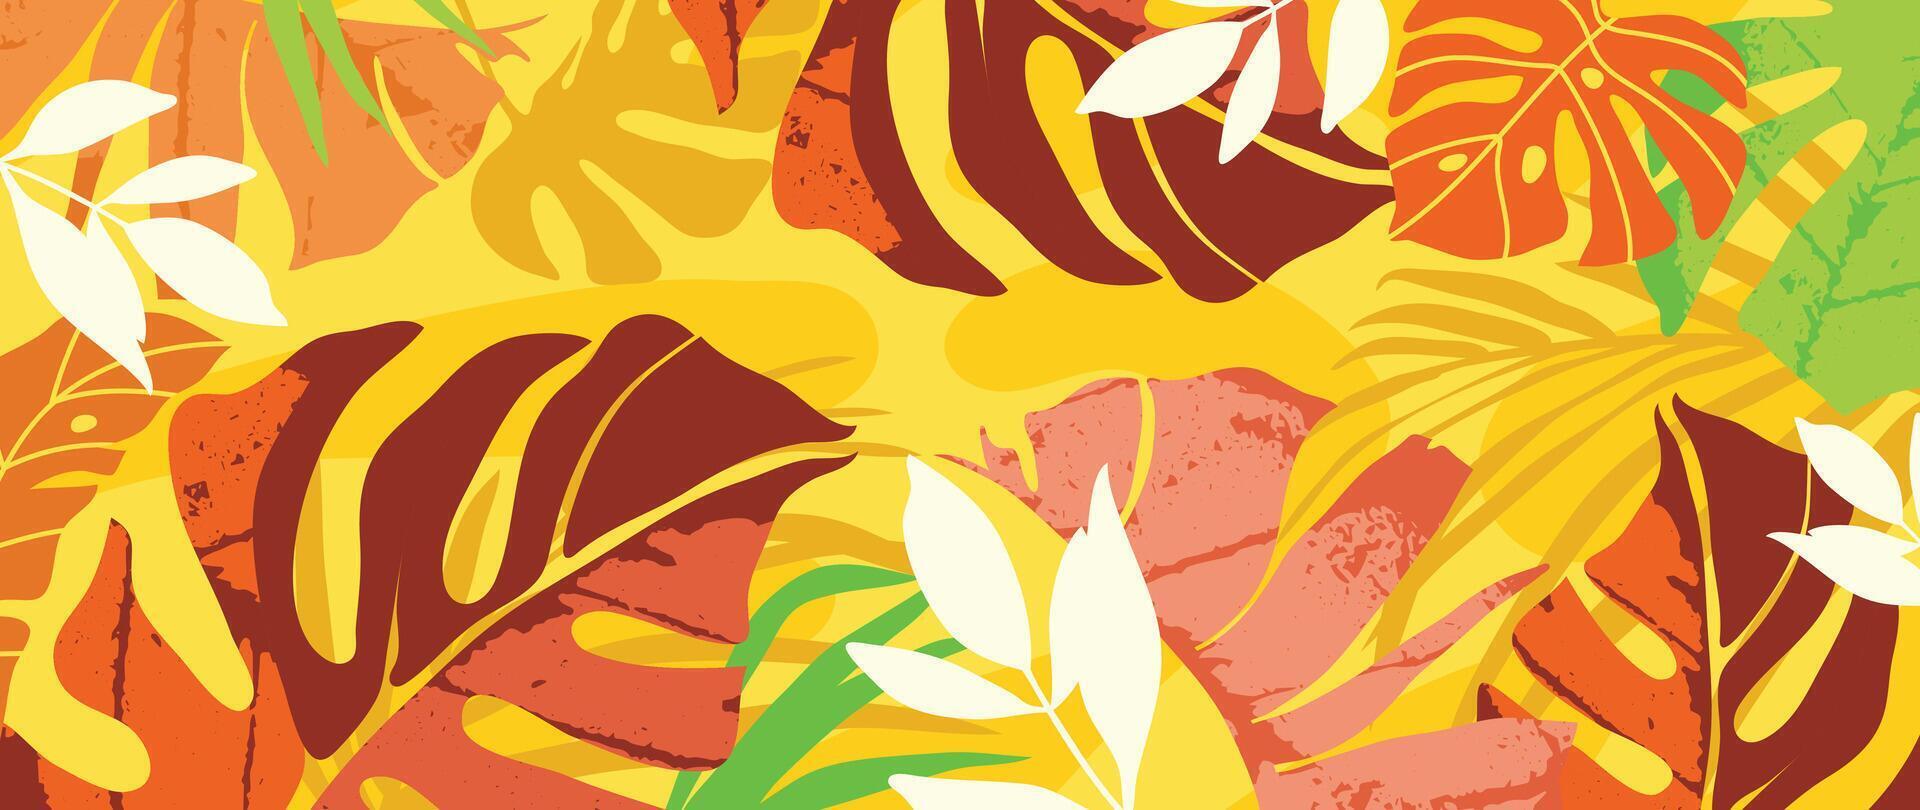 Summer tropical jungle yellow background vector. Colorful botanical with exotic plant, flowers, palm leaves, grunge texture. Happy summertime illustration for poster, cover, banner, prints. vector